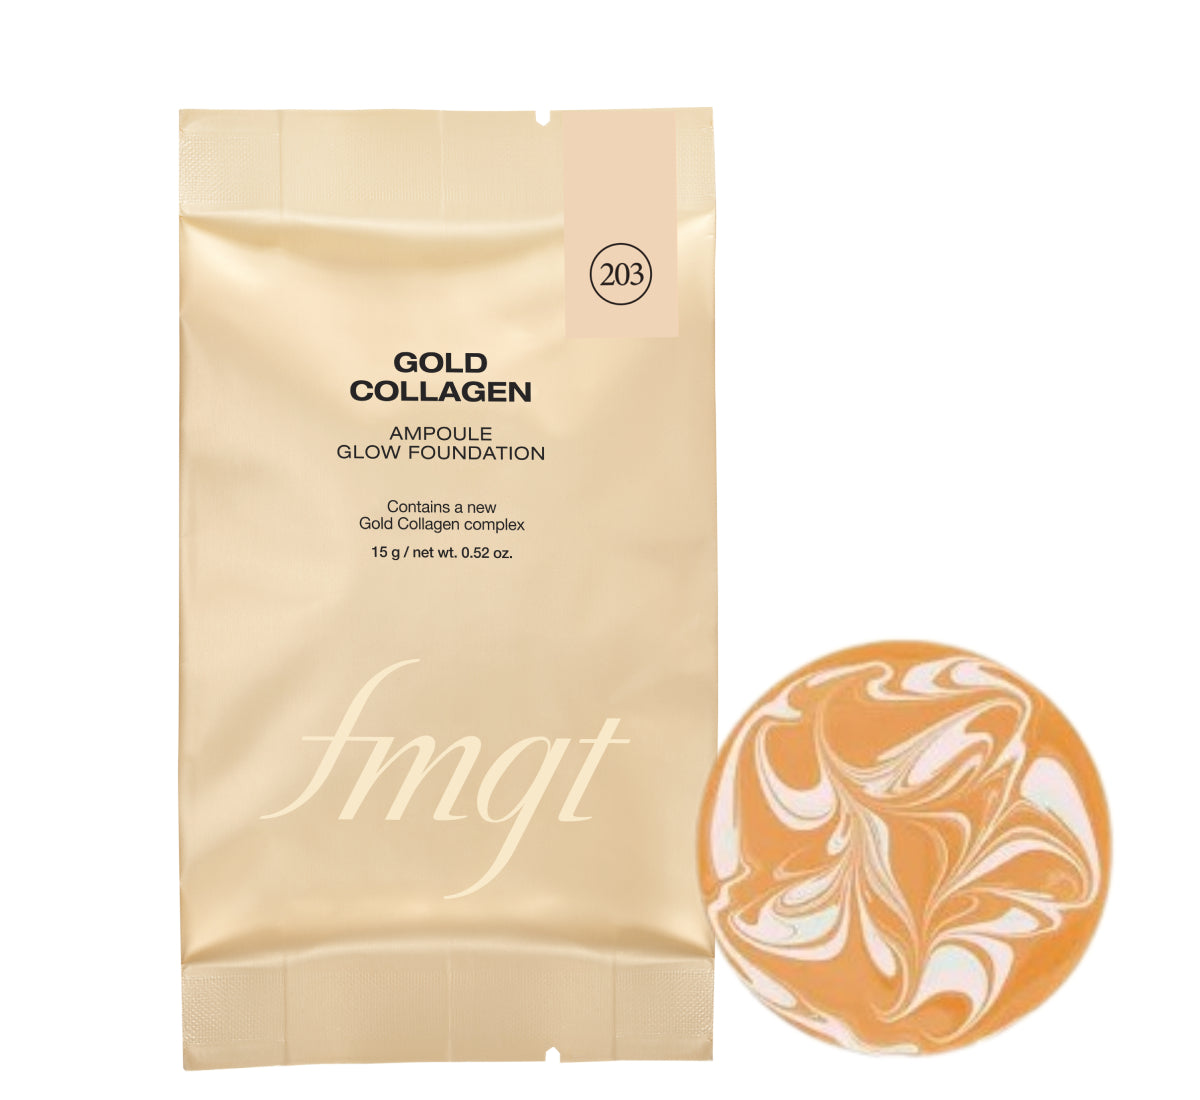 FMGT Gold collagen Ampoule Glow Foundation V203 (Refill) - 10g